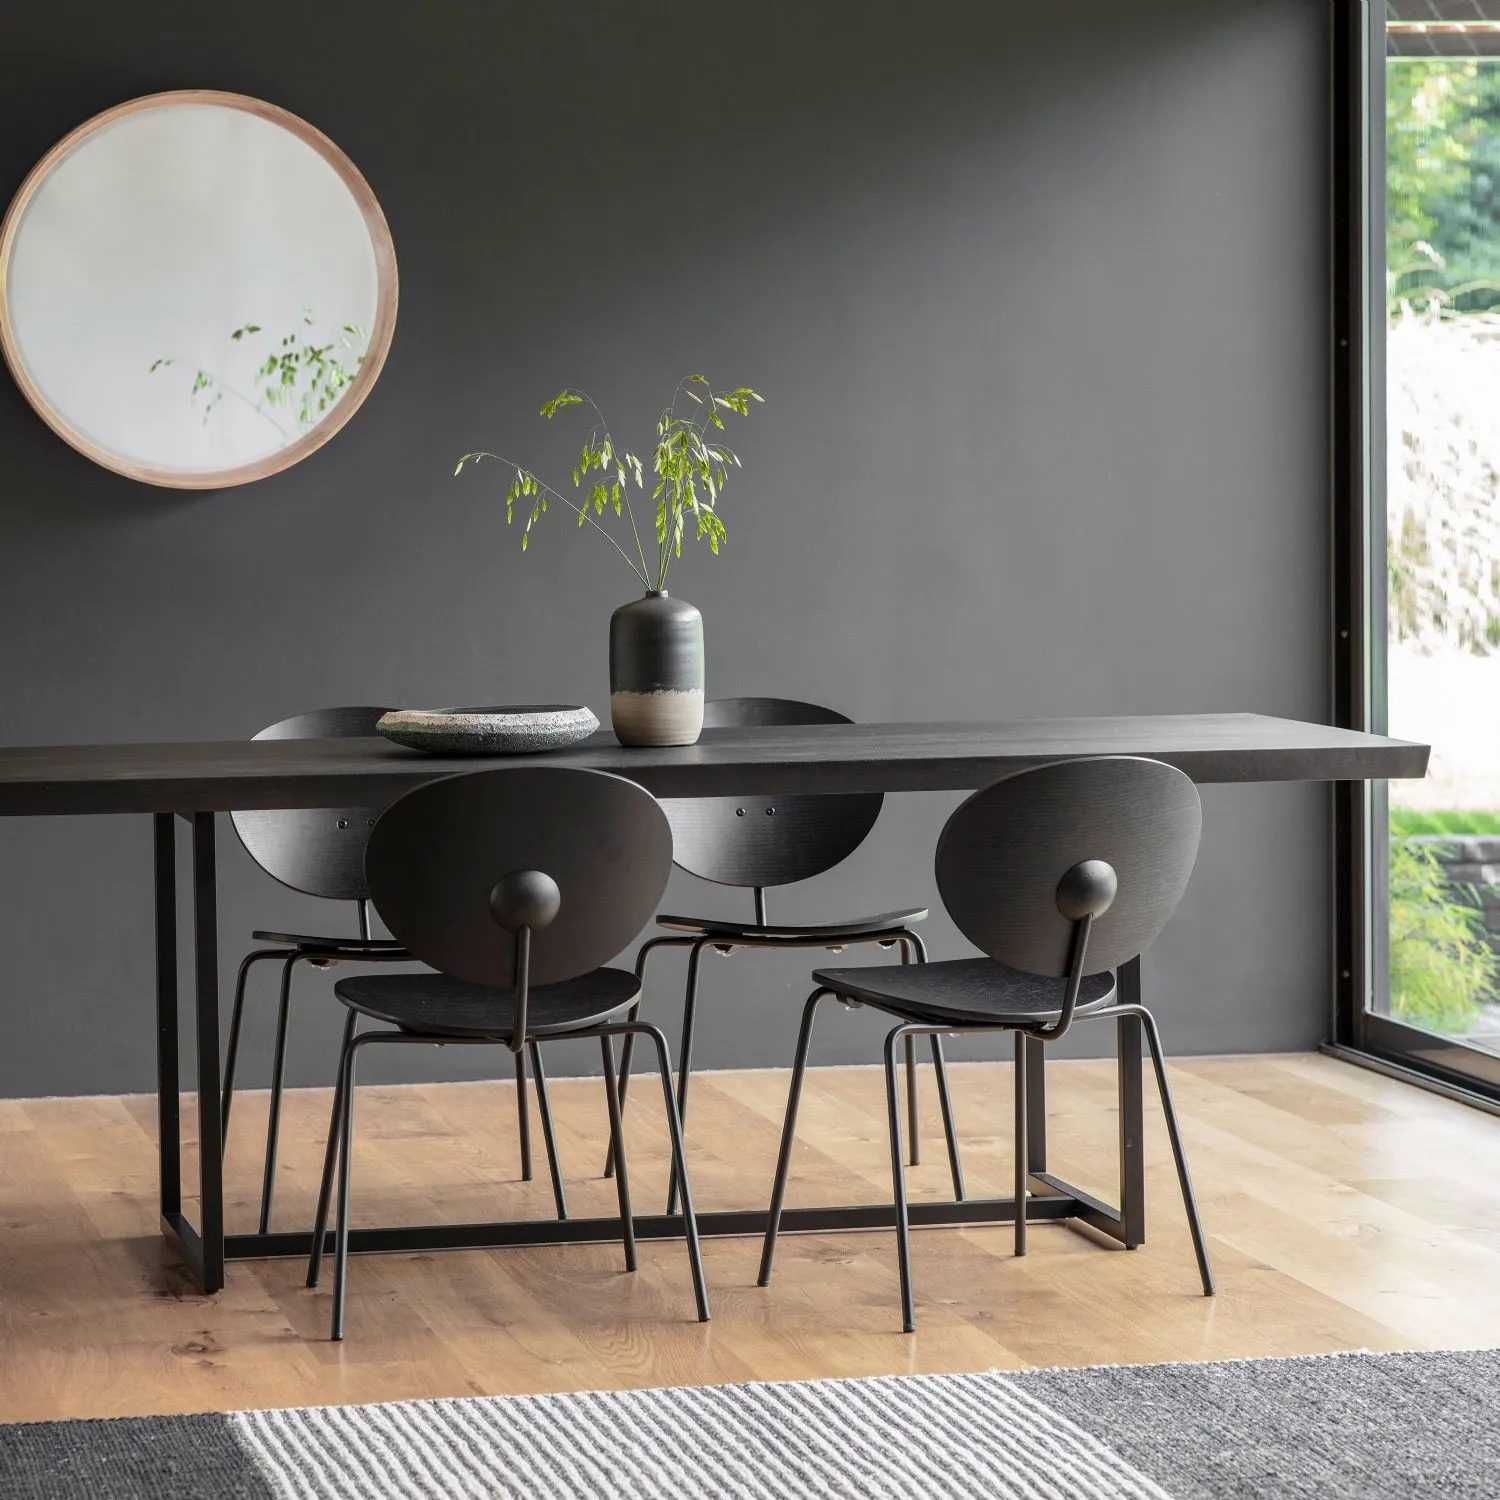 Black Wooden Top Extra Large Rectangular Dining Table